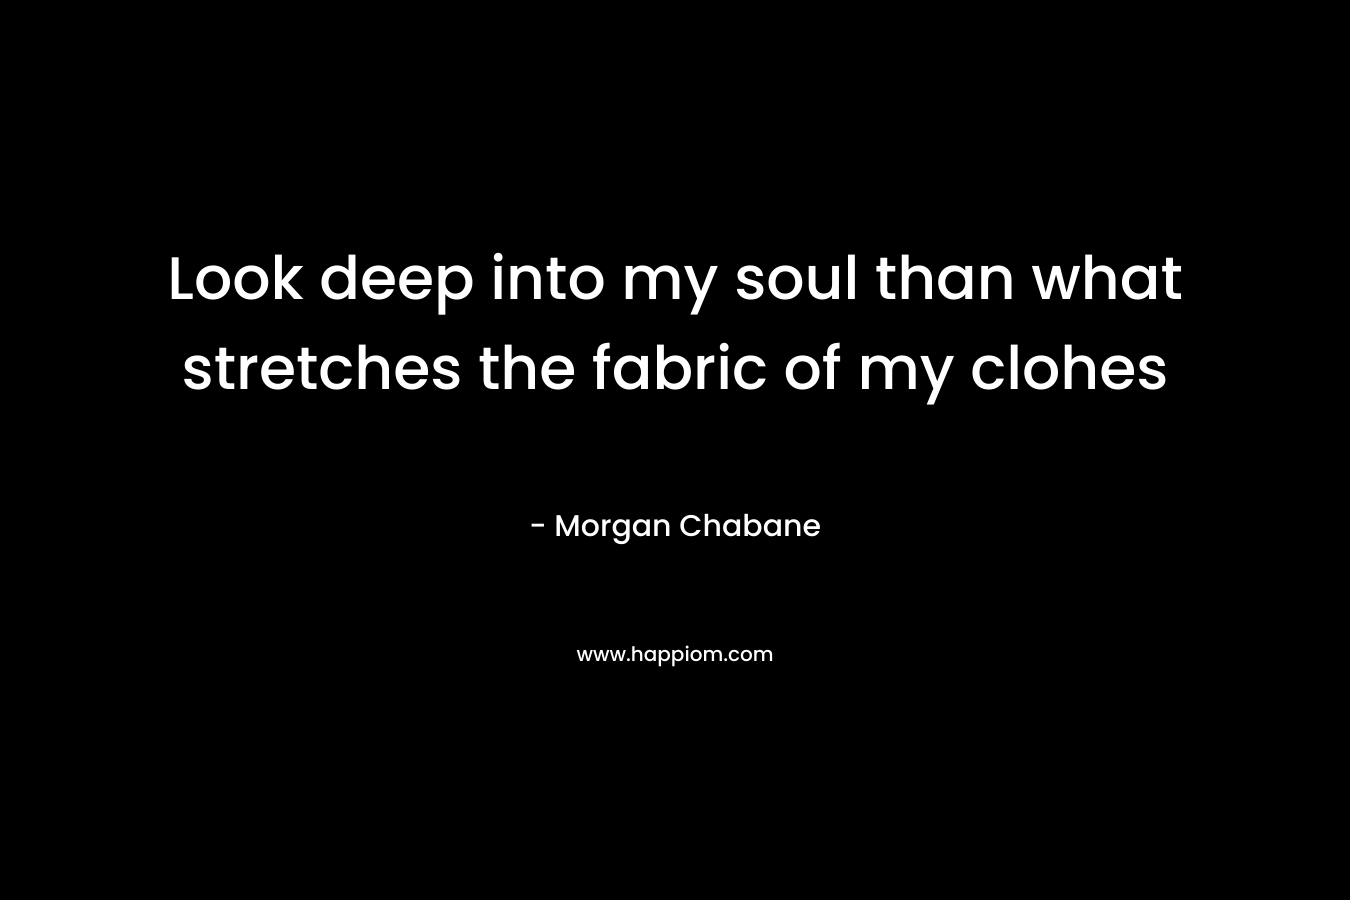 Look deep into my soul than what stretches the fabric of my clohes – Morgan Chabane